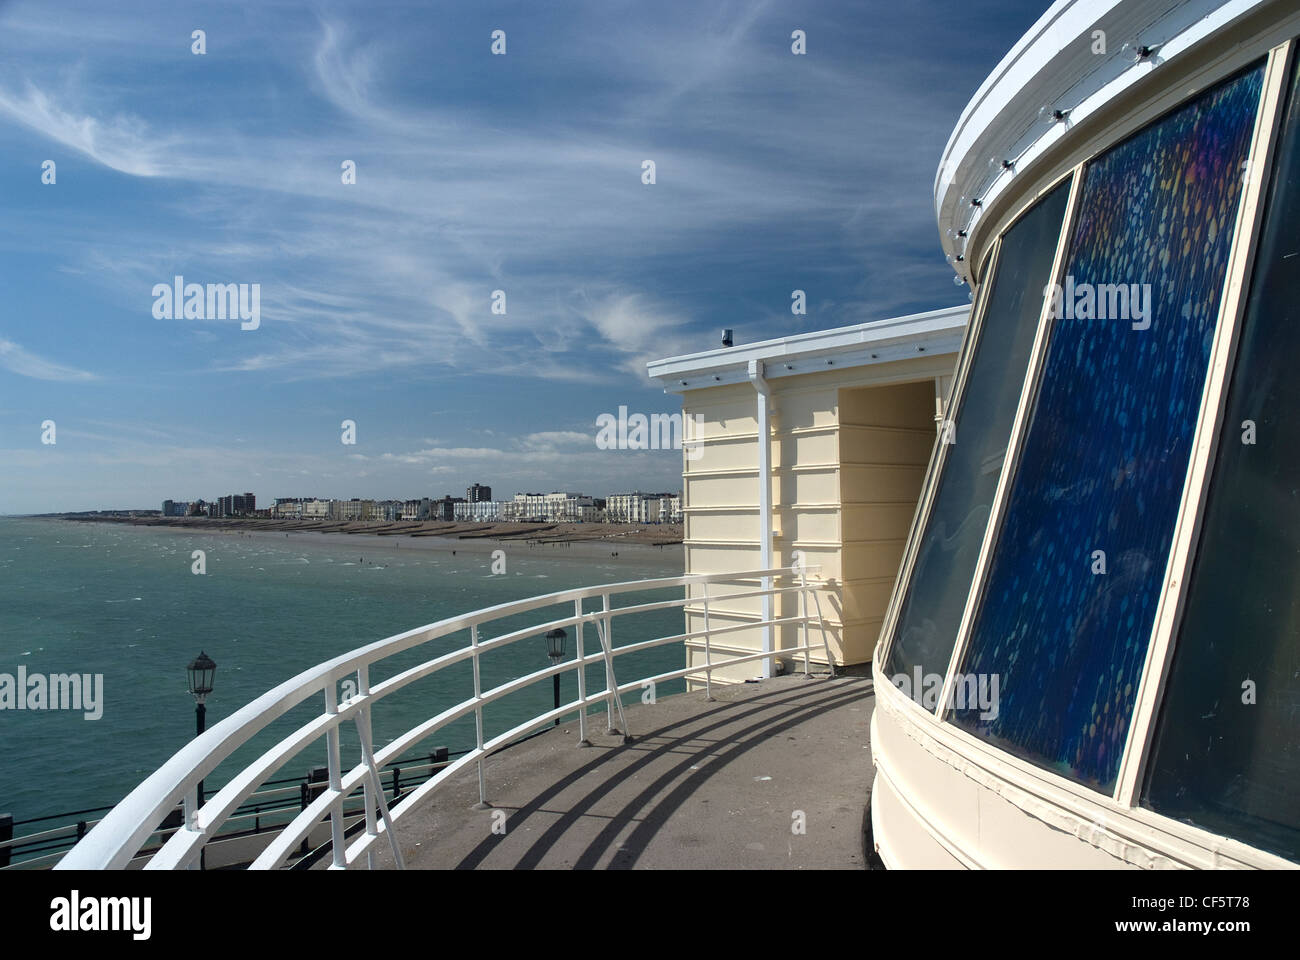 View from the southern end of Worthing Pier towards the town of Worthing. Stock Photo